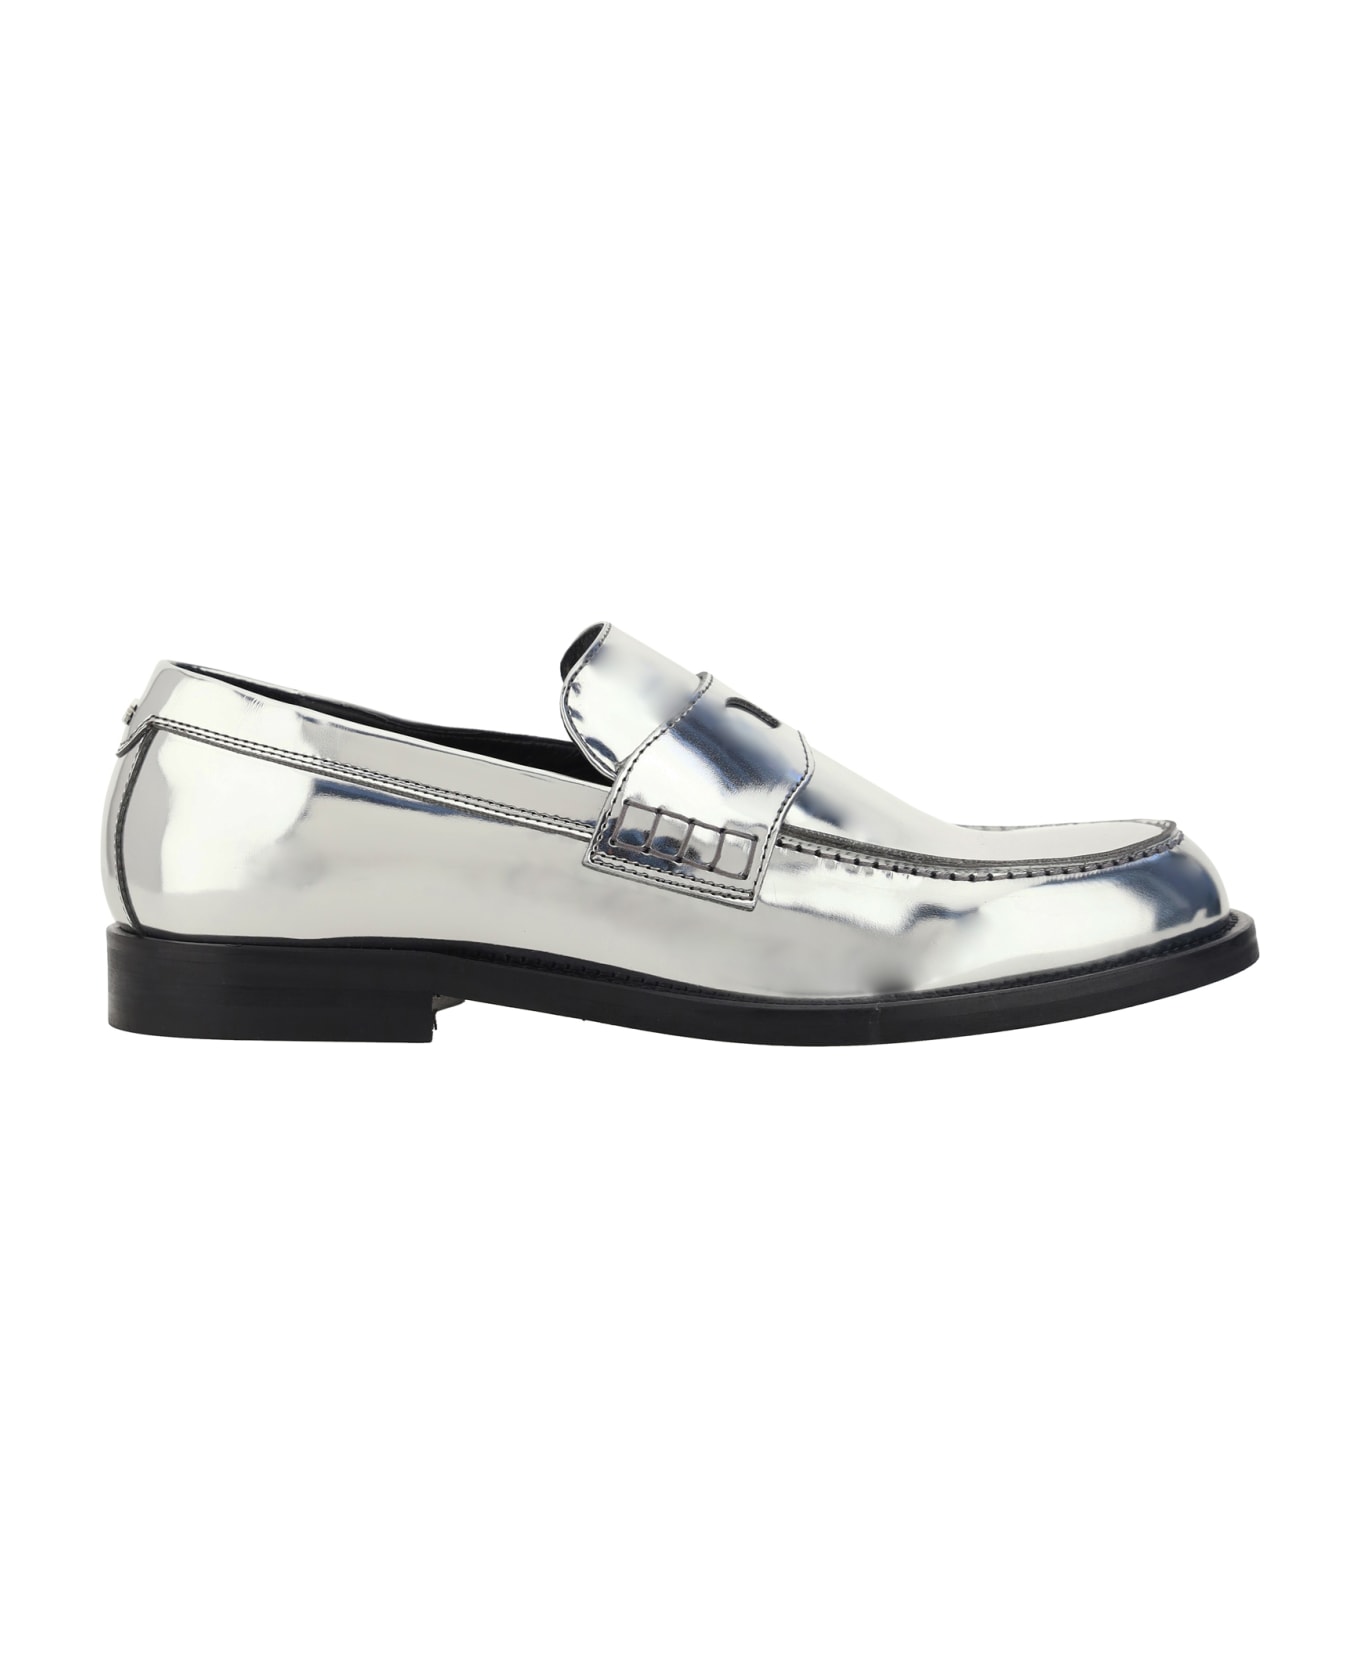 GCDS Loafers - Silver